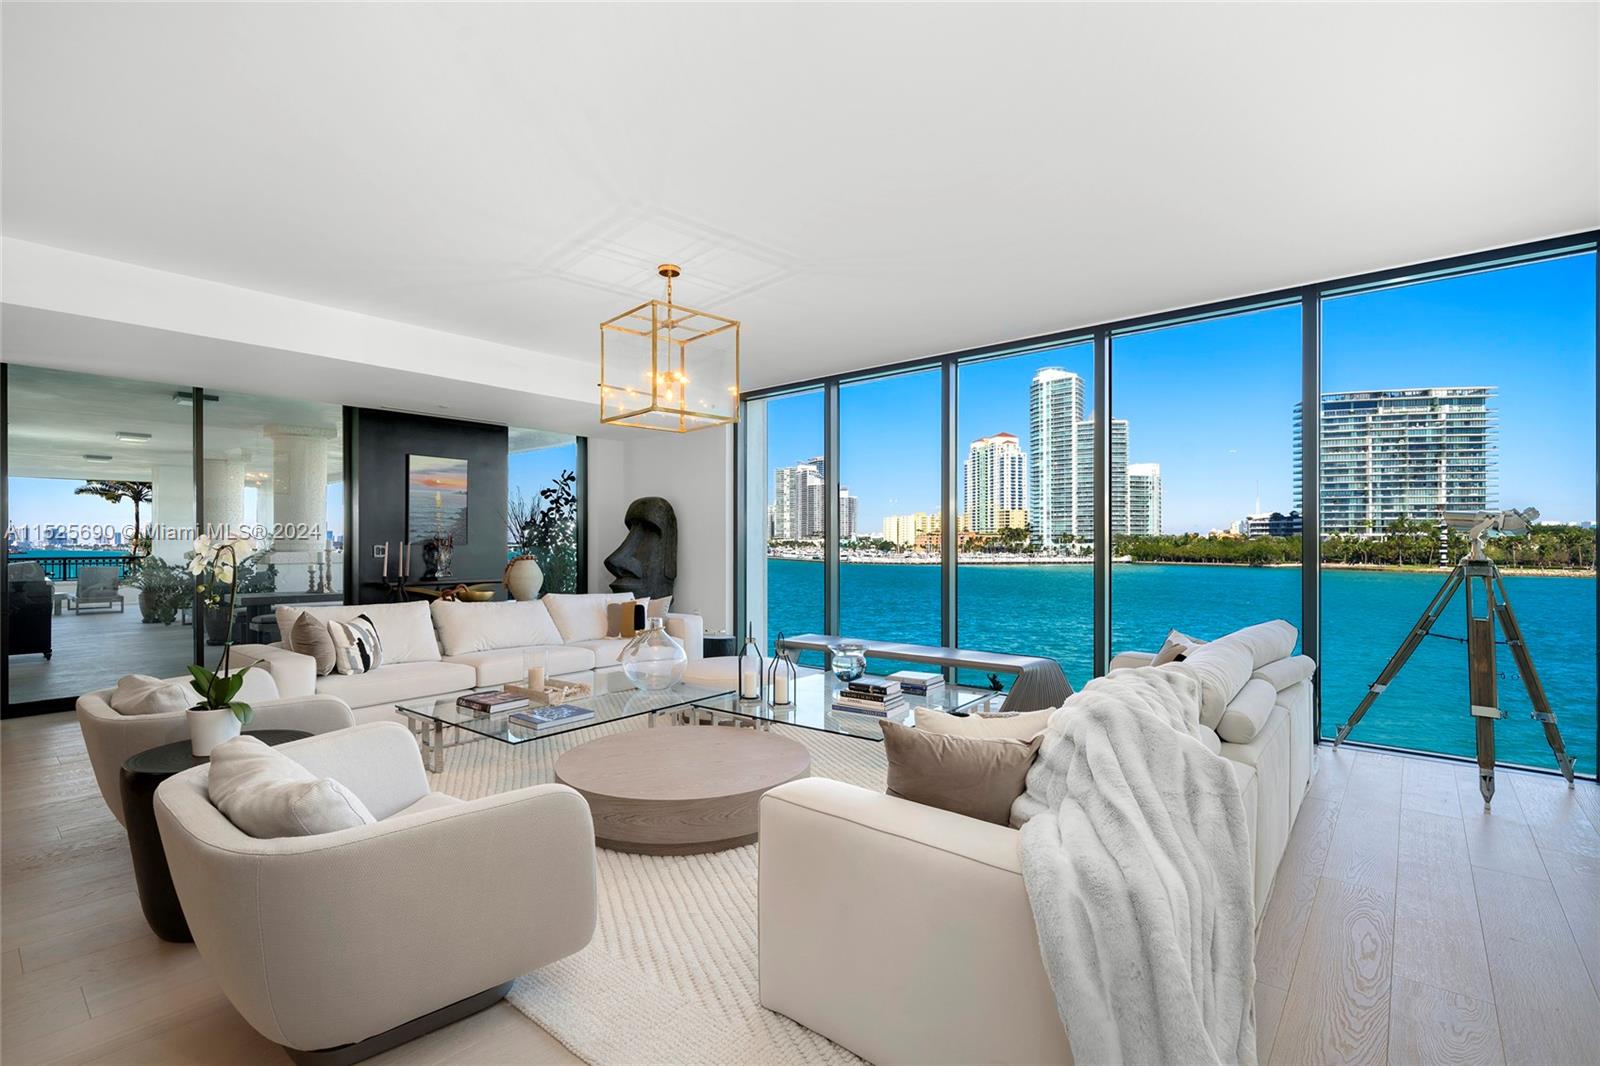 This stunning contemporary corner unit at the Palazzo Della Luna is offered furnished. Private elevator entry, featuring 4BR/4+1BA and 4,904 SF of luxury. Wide plank oak wood floors throughout, extended flow through family, dining &amp; living room with access to a wraparound terrace made to entertain w/direct views to Biscayne Bay, Government Cut, Miami Beach &amp; Ocean. Custom Boffi designed kitchen features granite countertops, top-of-the-line Miele &amp; Sub-Zero appliances. Elegant principal suite surrounded by walls of glass w/direct water views, dual walk-in closets &amp; beautiful bathroom w/Carrara marble rain shower &amp; soaking tub. Three other bedrooms are each spacious w/en-suite bathrooms. The unit boasts one of the largest wraparound terraces &amp; combined with a back terrace totals 2,417 SF.